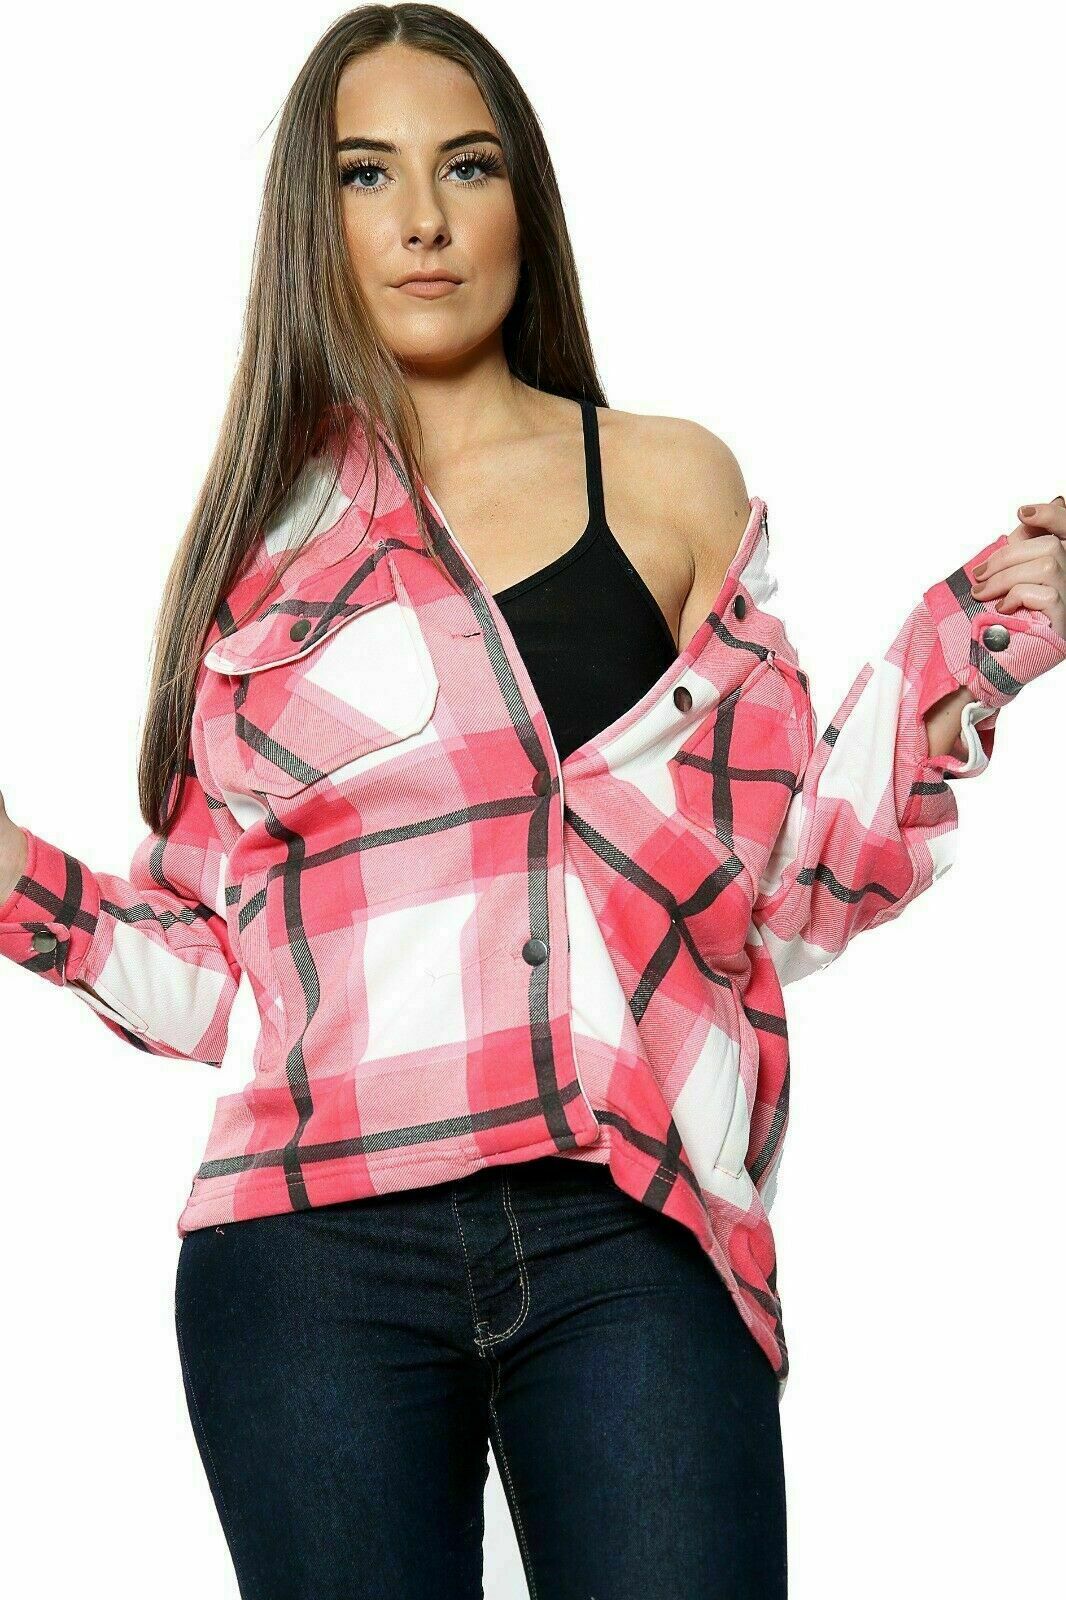 Ladies Oversized Shirt In A Red Check Design. Available In Sizes 4-8, 8-10, 12-14, 16-18. They Are Perfect To Wear Over A T-Shirt & Jeans As A Jacket.